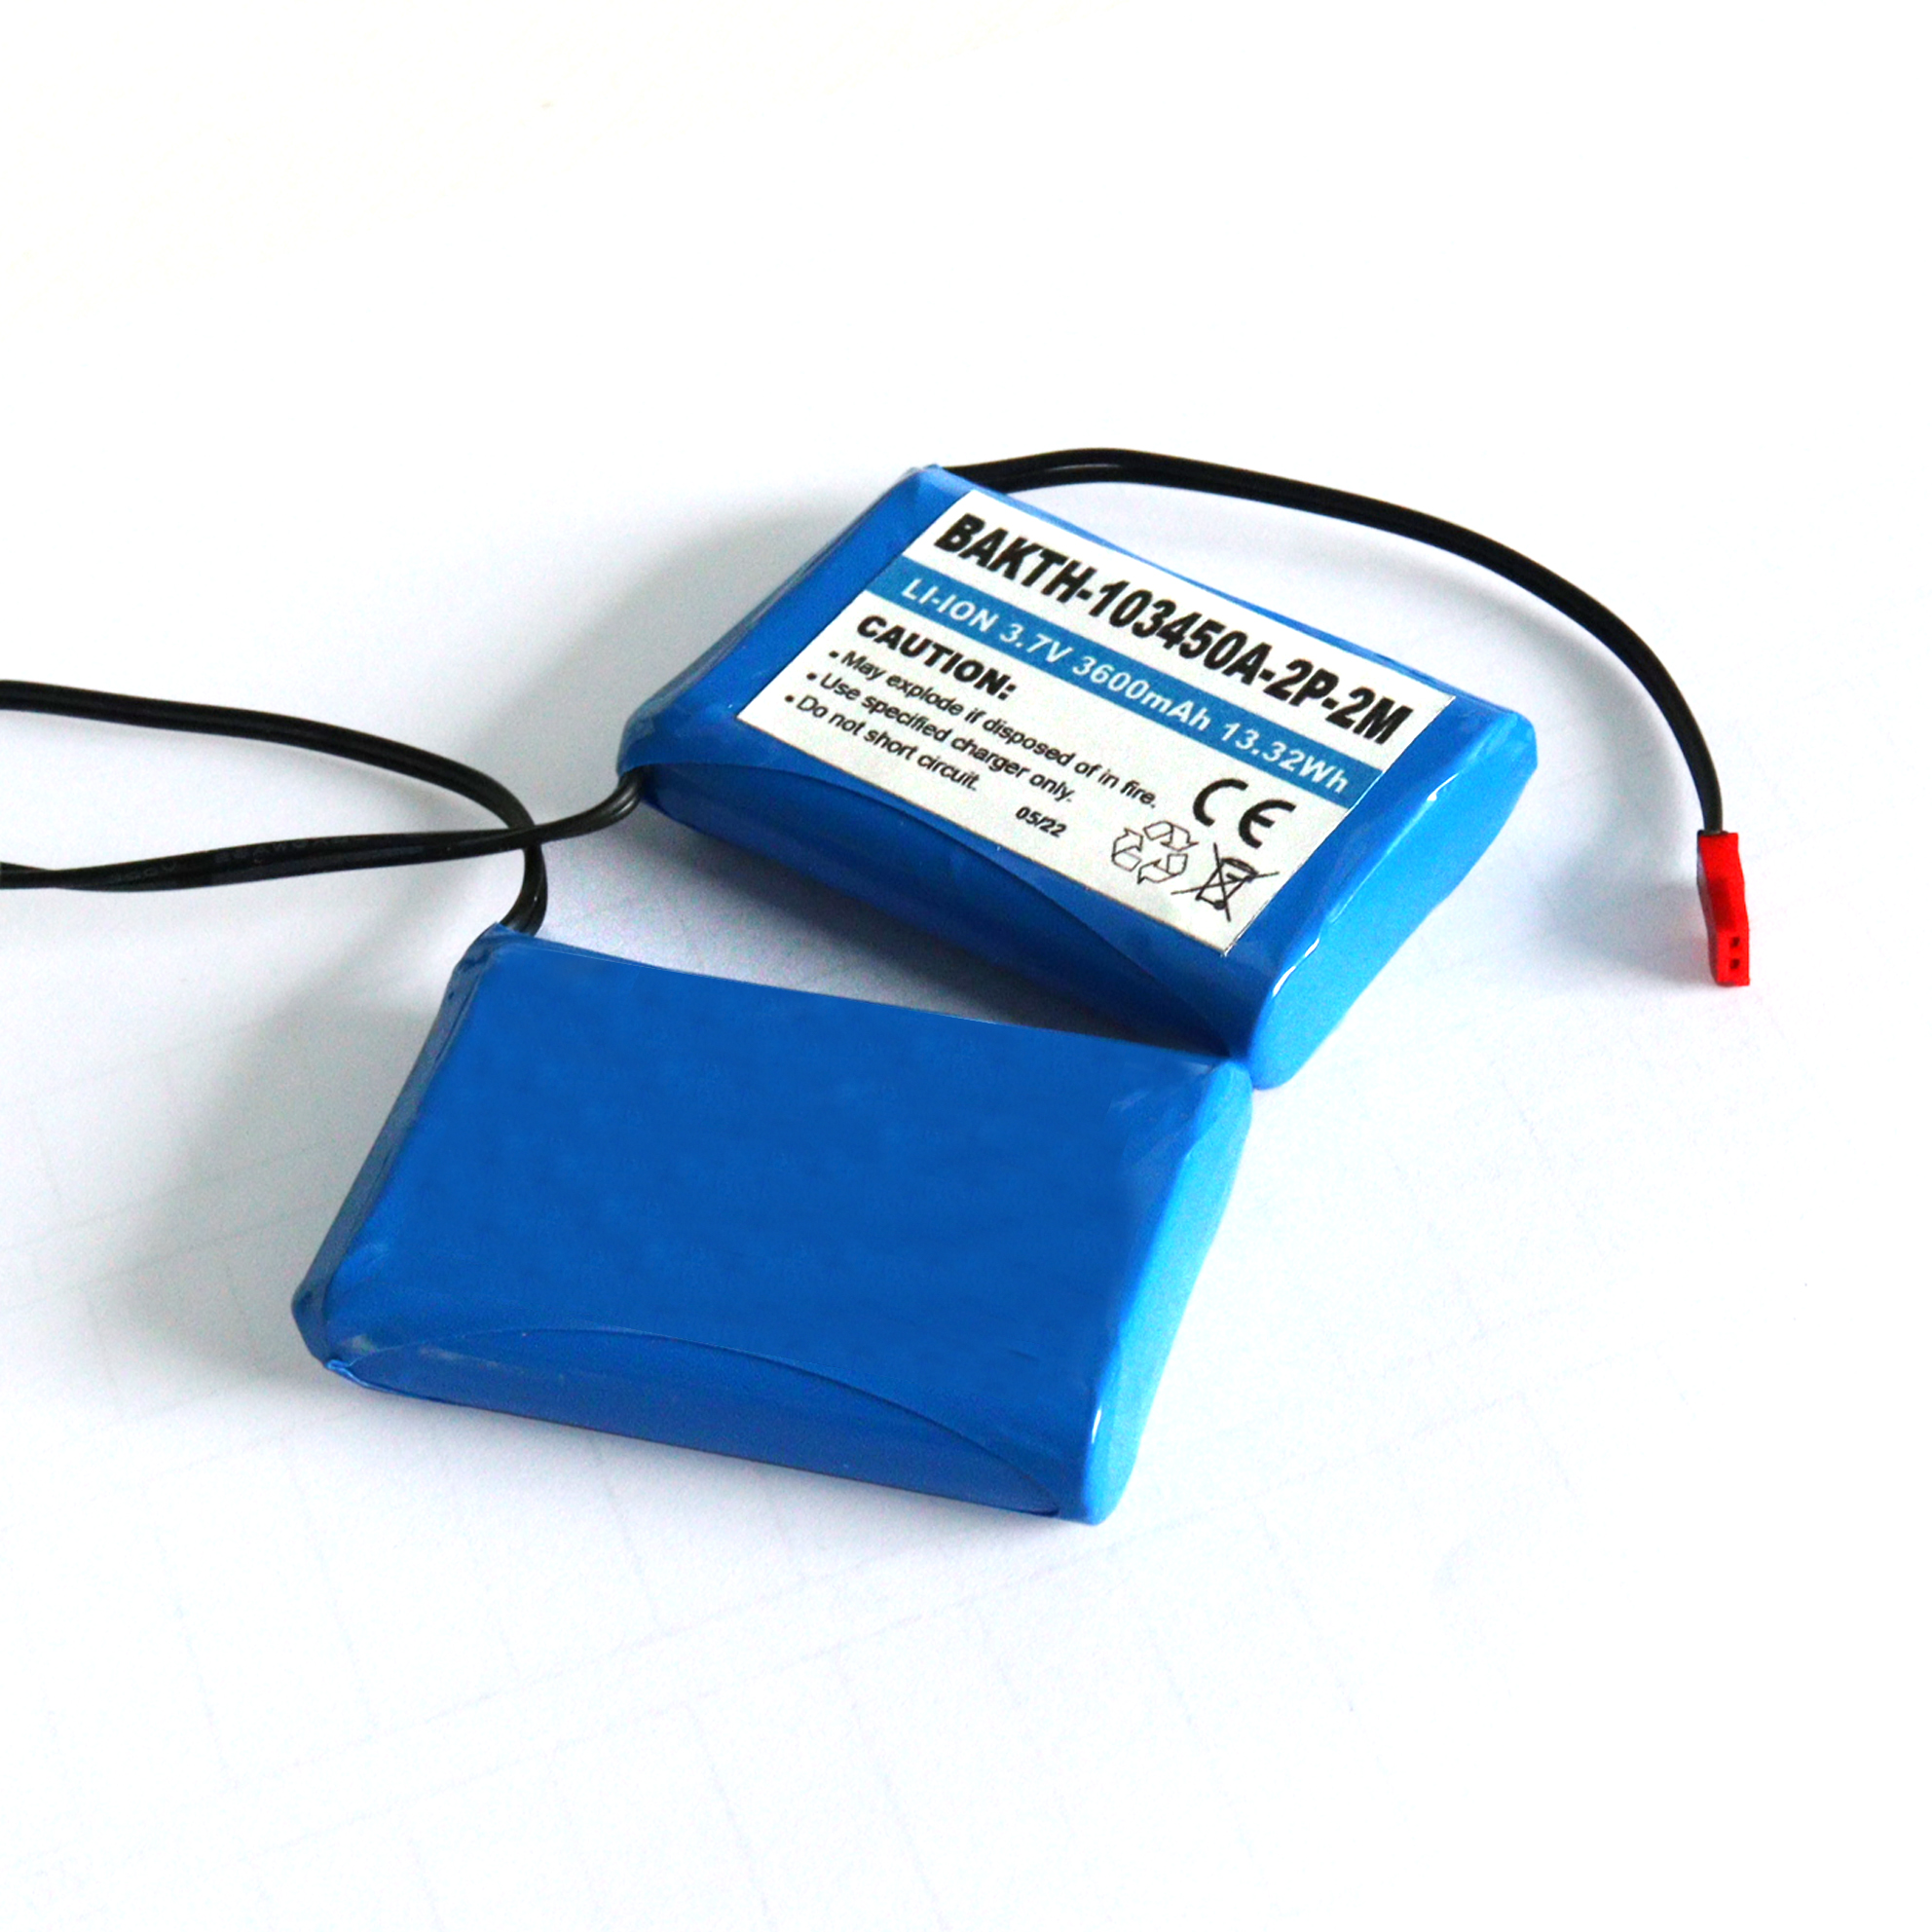 Lithium Battery 3600mAh High Energy for Ski Boots